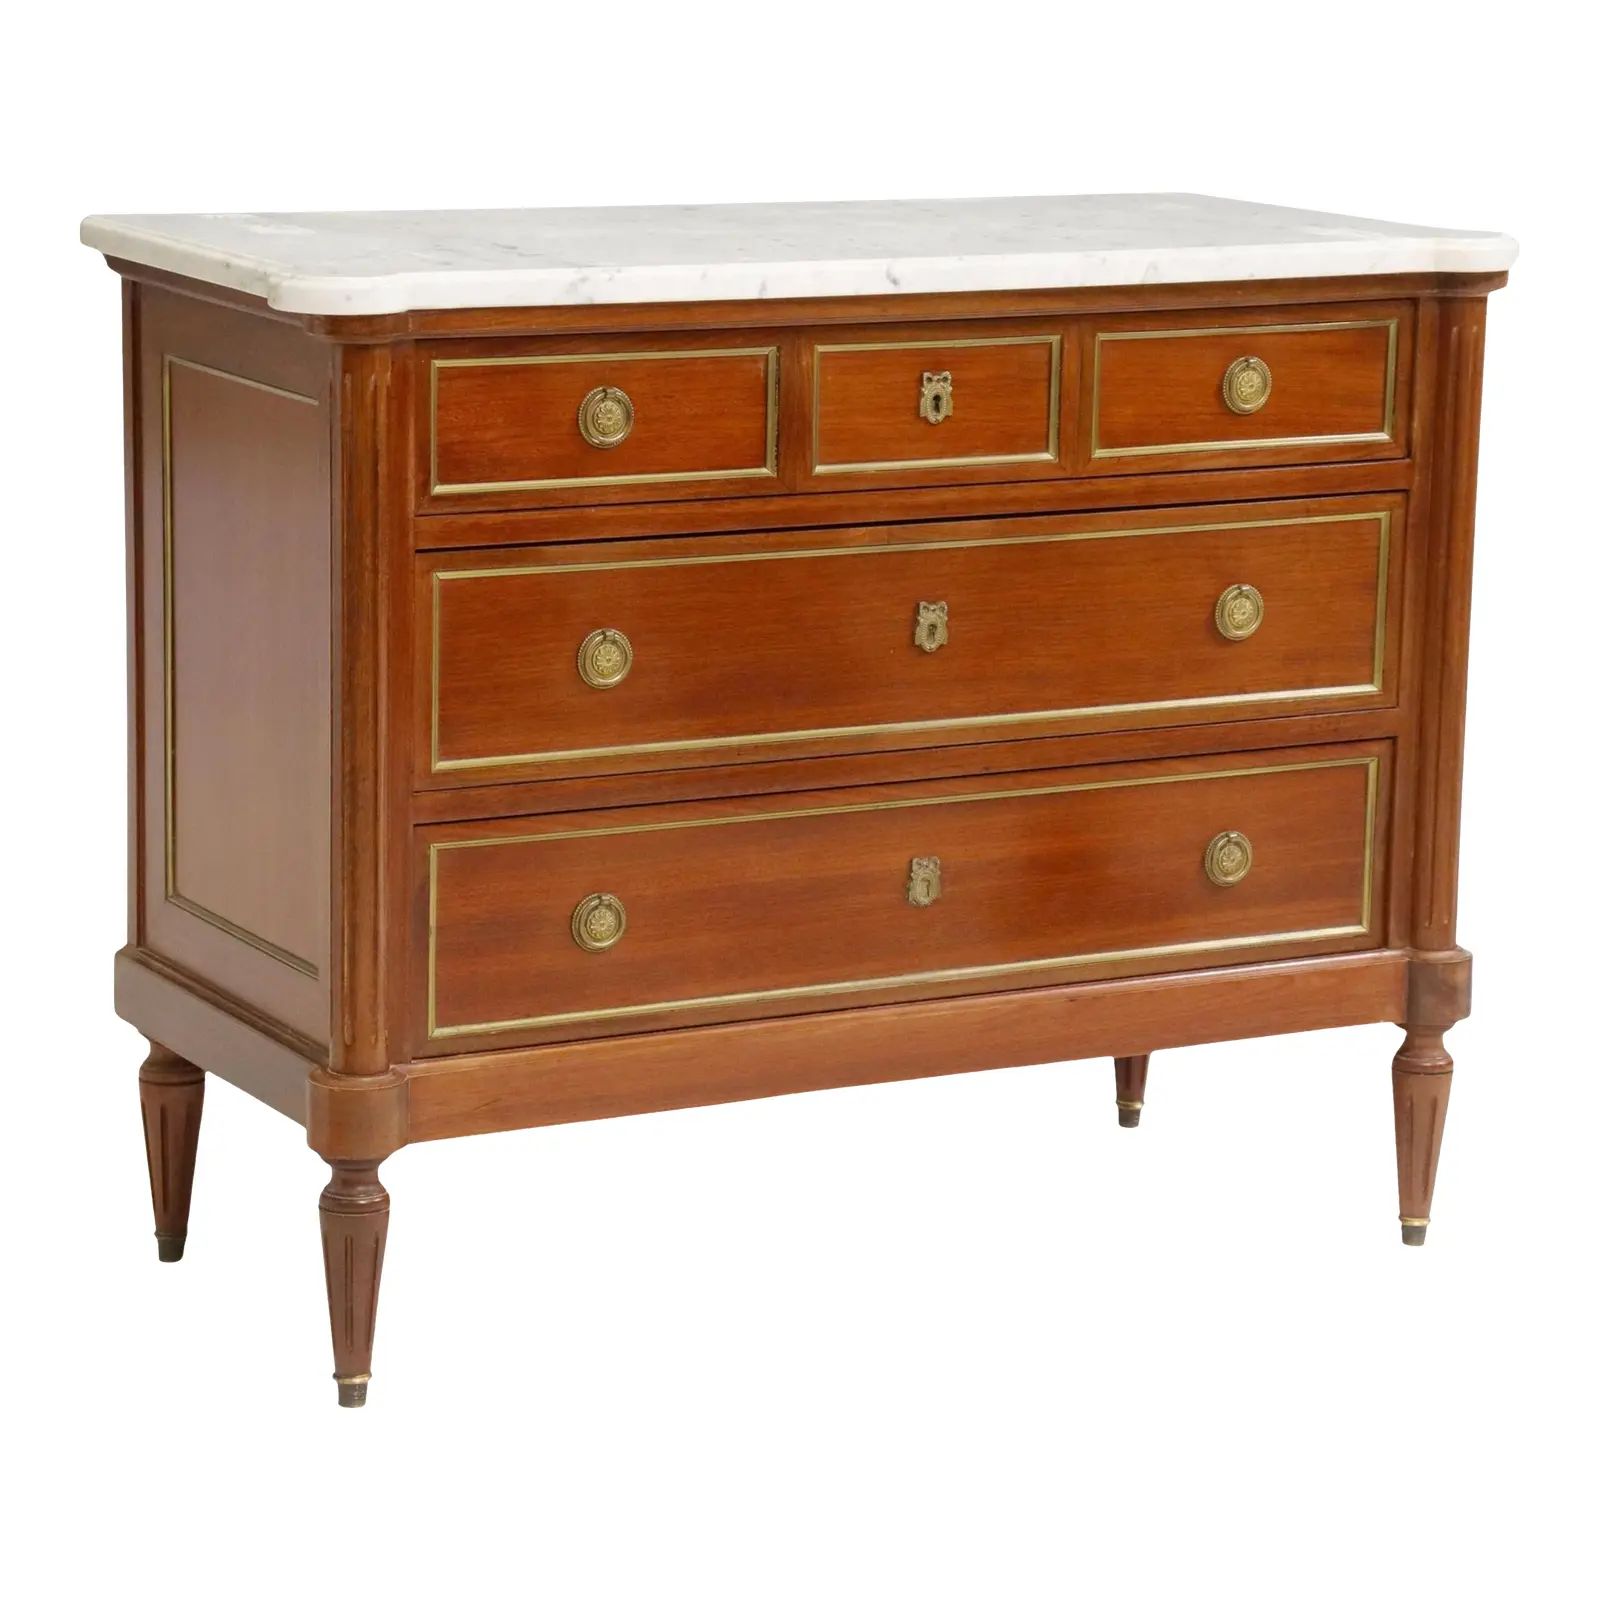 Early 20th Century French Louis XVI Style Mahogany Marble Commode | Chairish